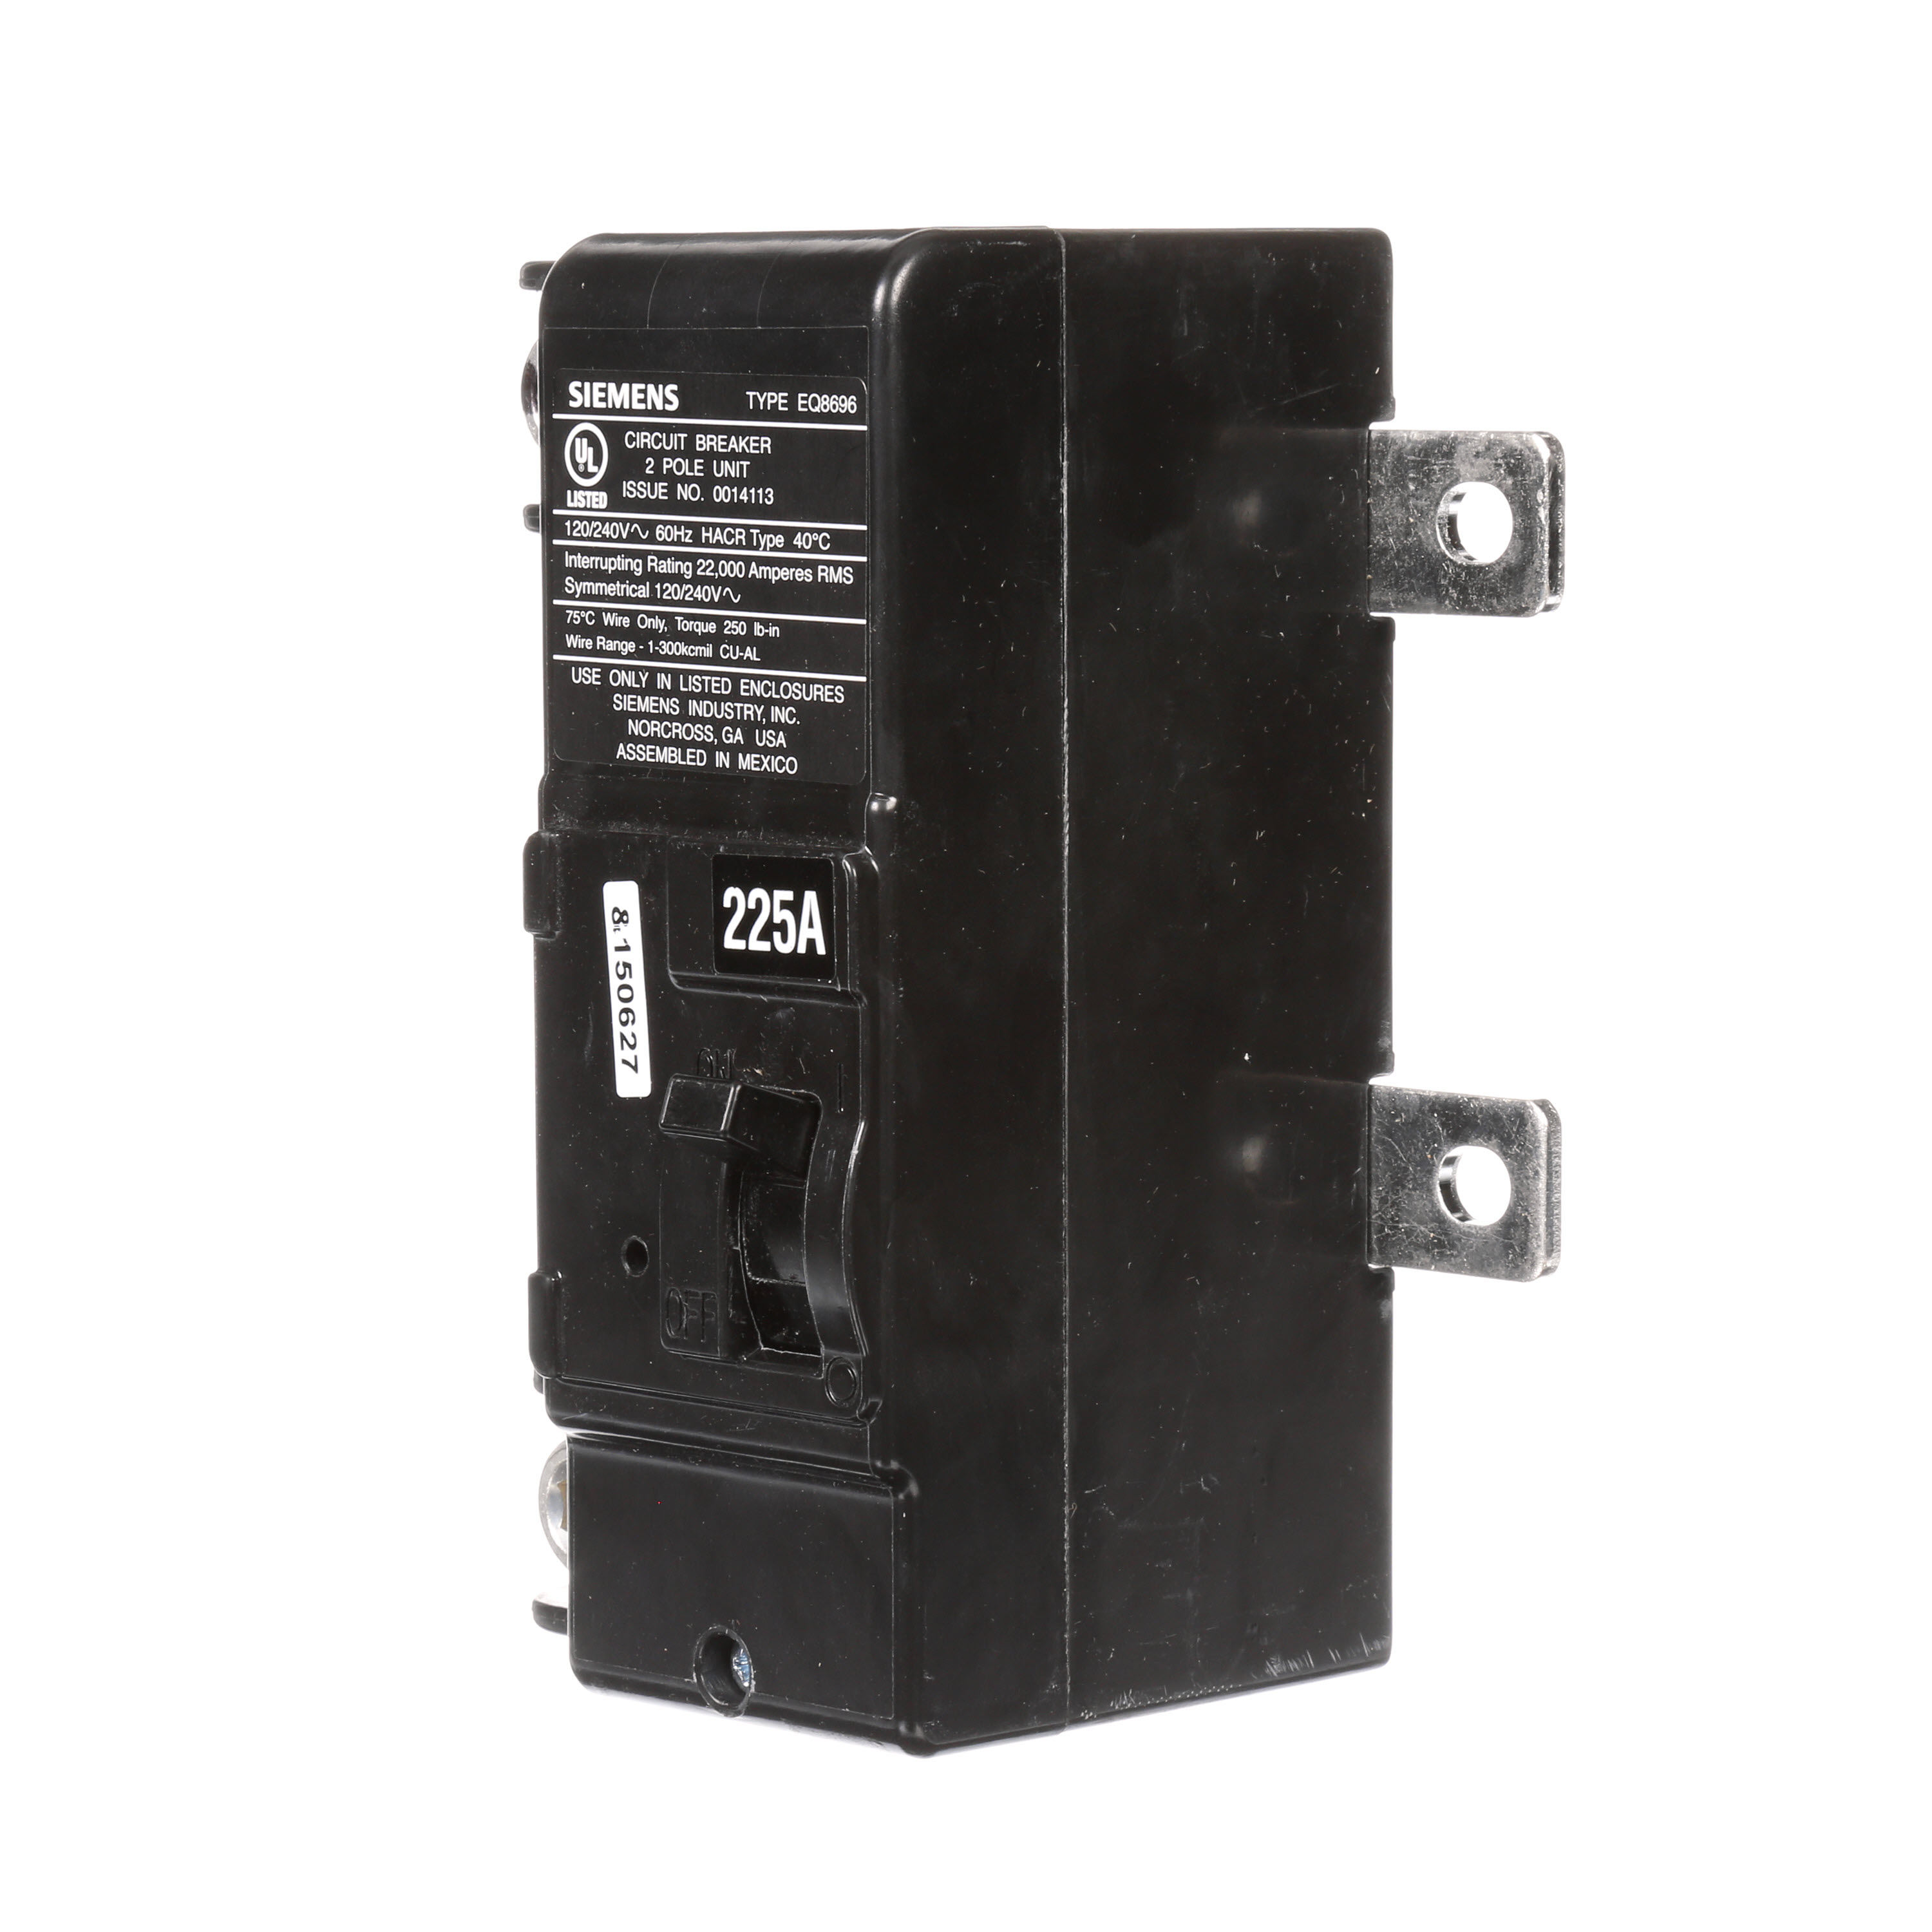 Siemens Low Voltage Residential Circuit Breakers Main Breakers - Family G Mainsare Circuit Protection Load Center Mains, Feeders, and Miniature Circuit Breakers. Load center conversion kit 1-Phase main breaker.. Rated (225A) AIR 22 KA.